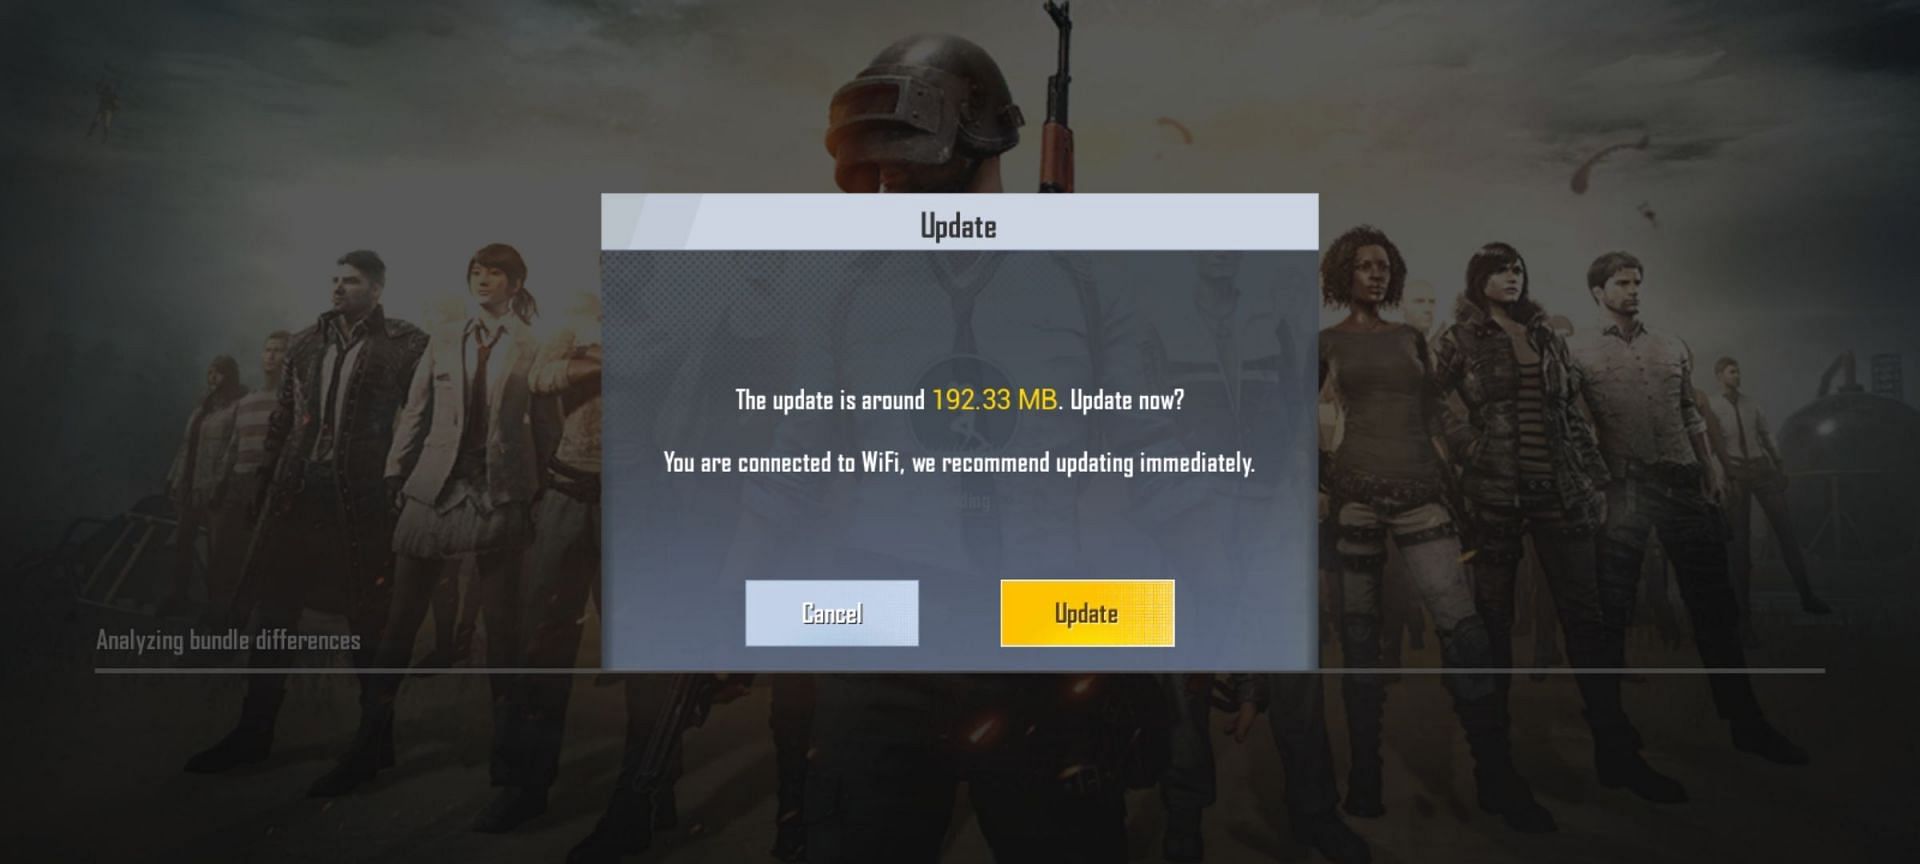 The in-game update they need to do is 192.33MB (Image via PUBG Mobile Lite)